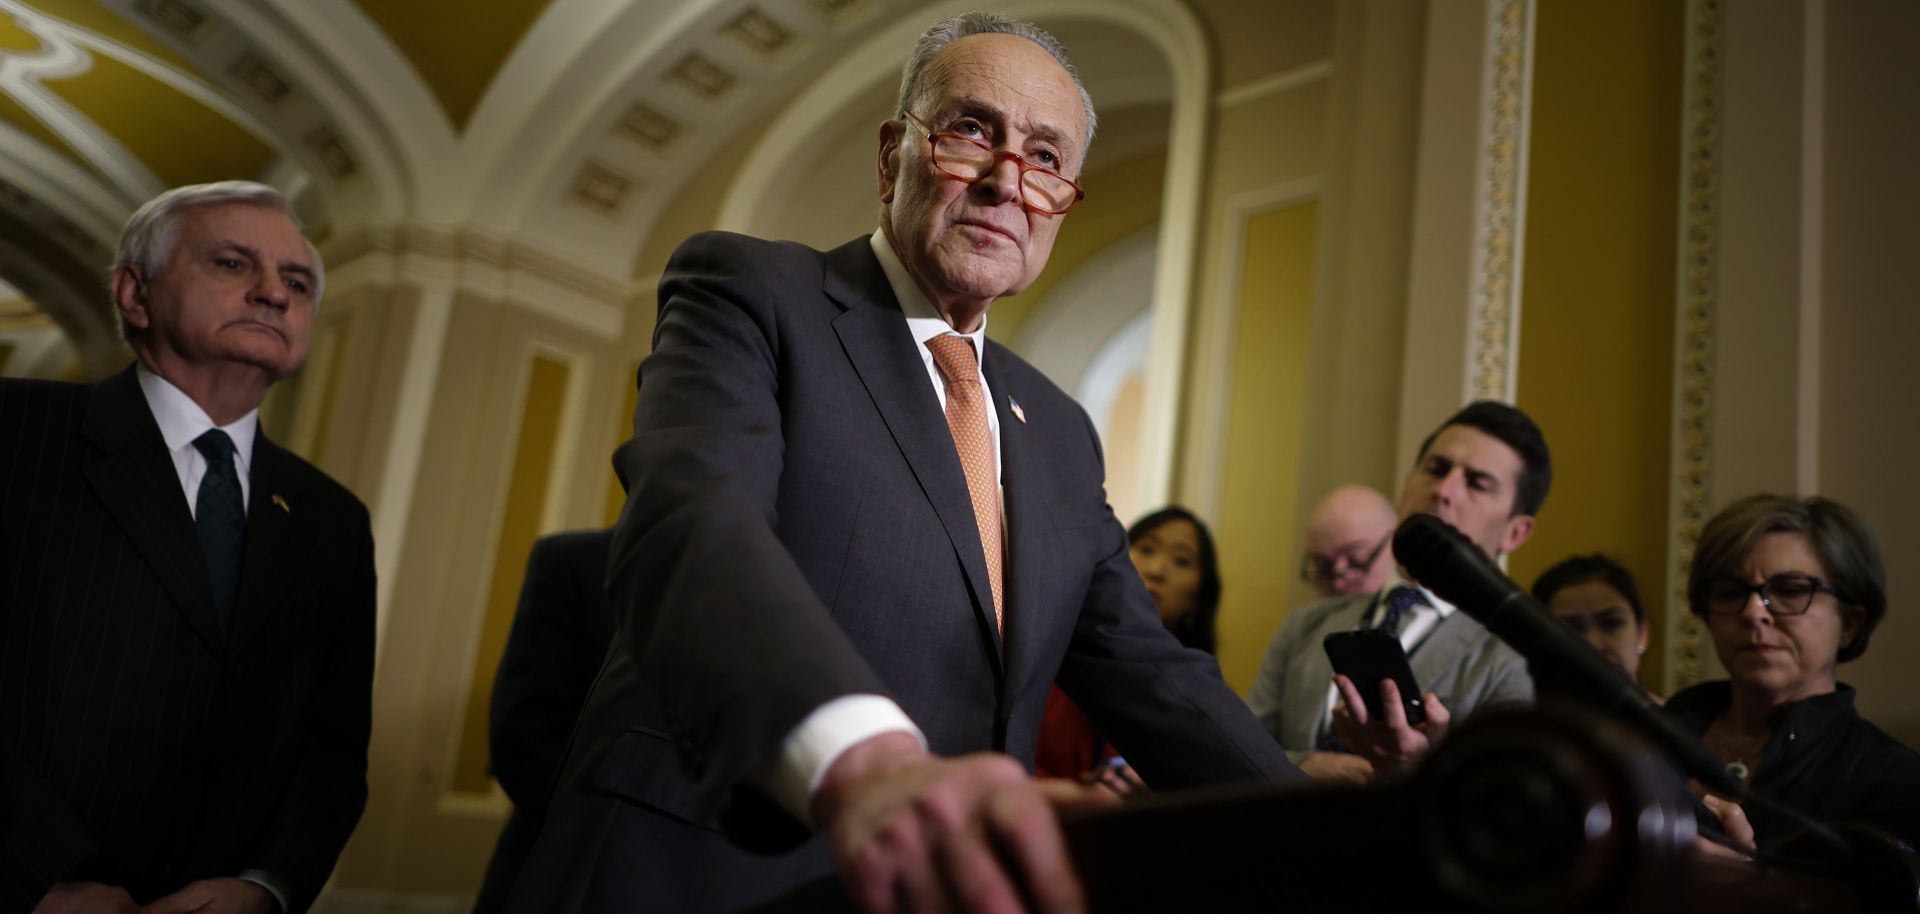 Senate Majority Leader Chuck Schumer (D-NY) talks to reporters following the weekly Senate Democratic policy luncheon at the U.S. Capitol on Feb. 28, 2023, in Washington, D.C. 